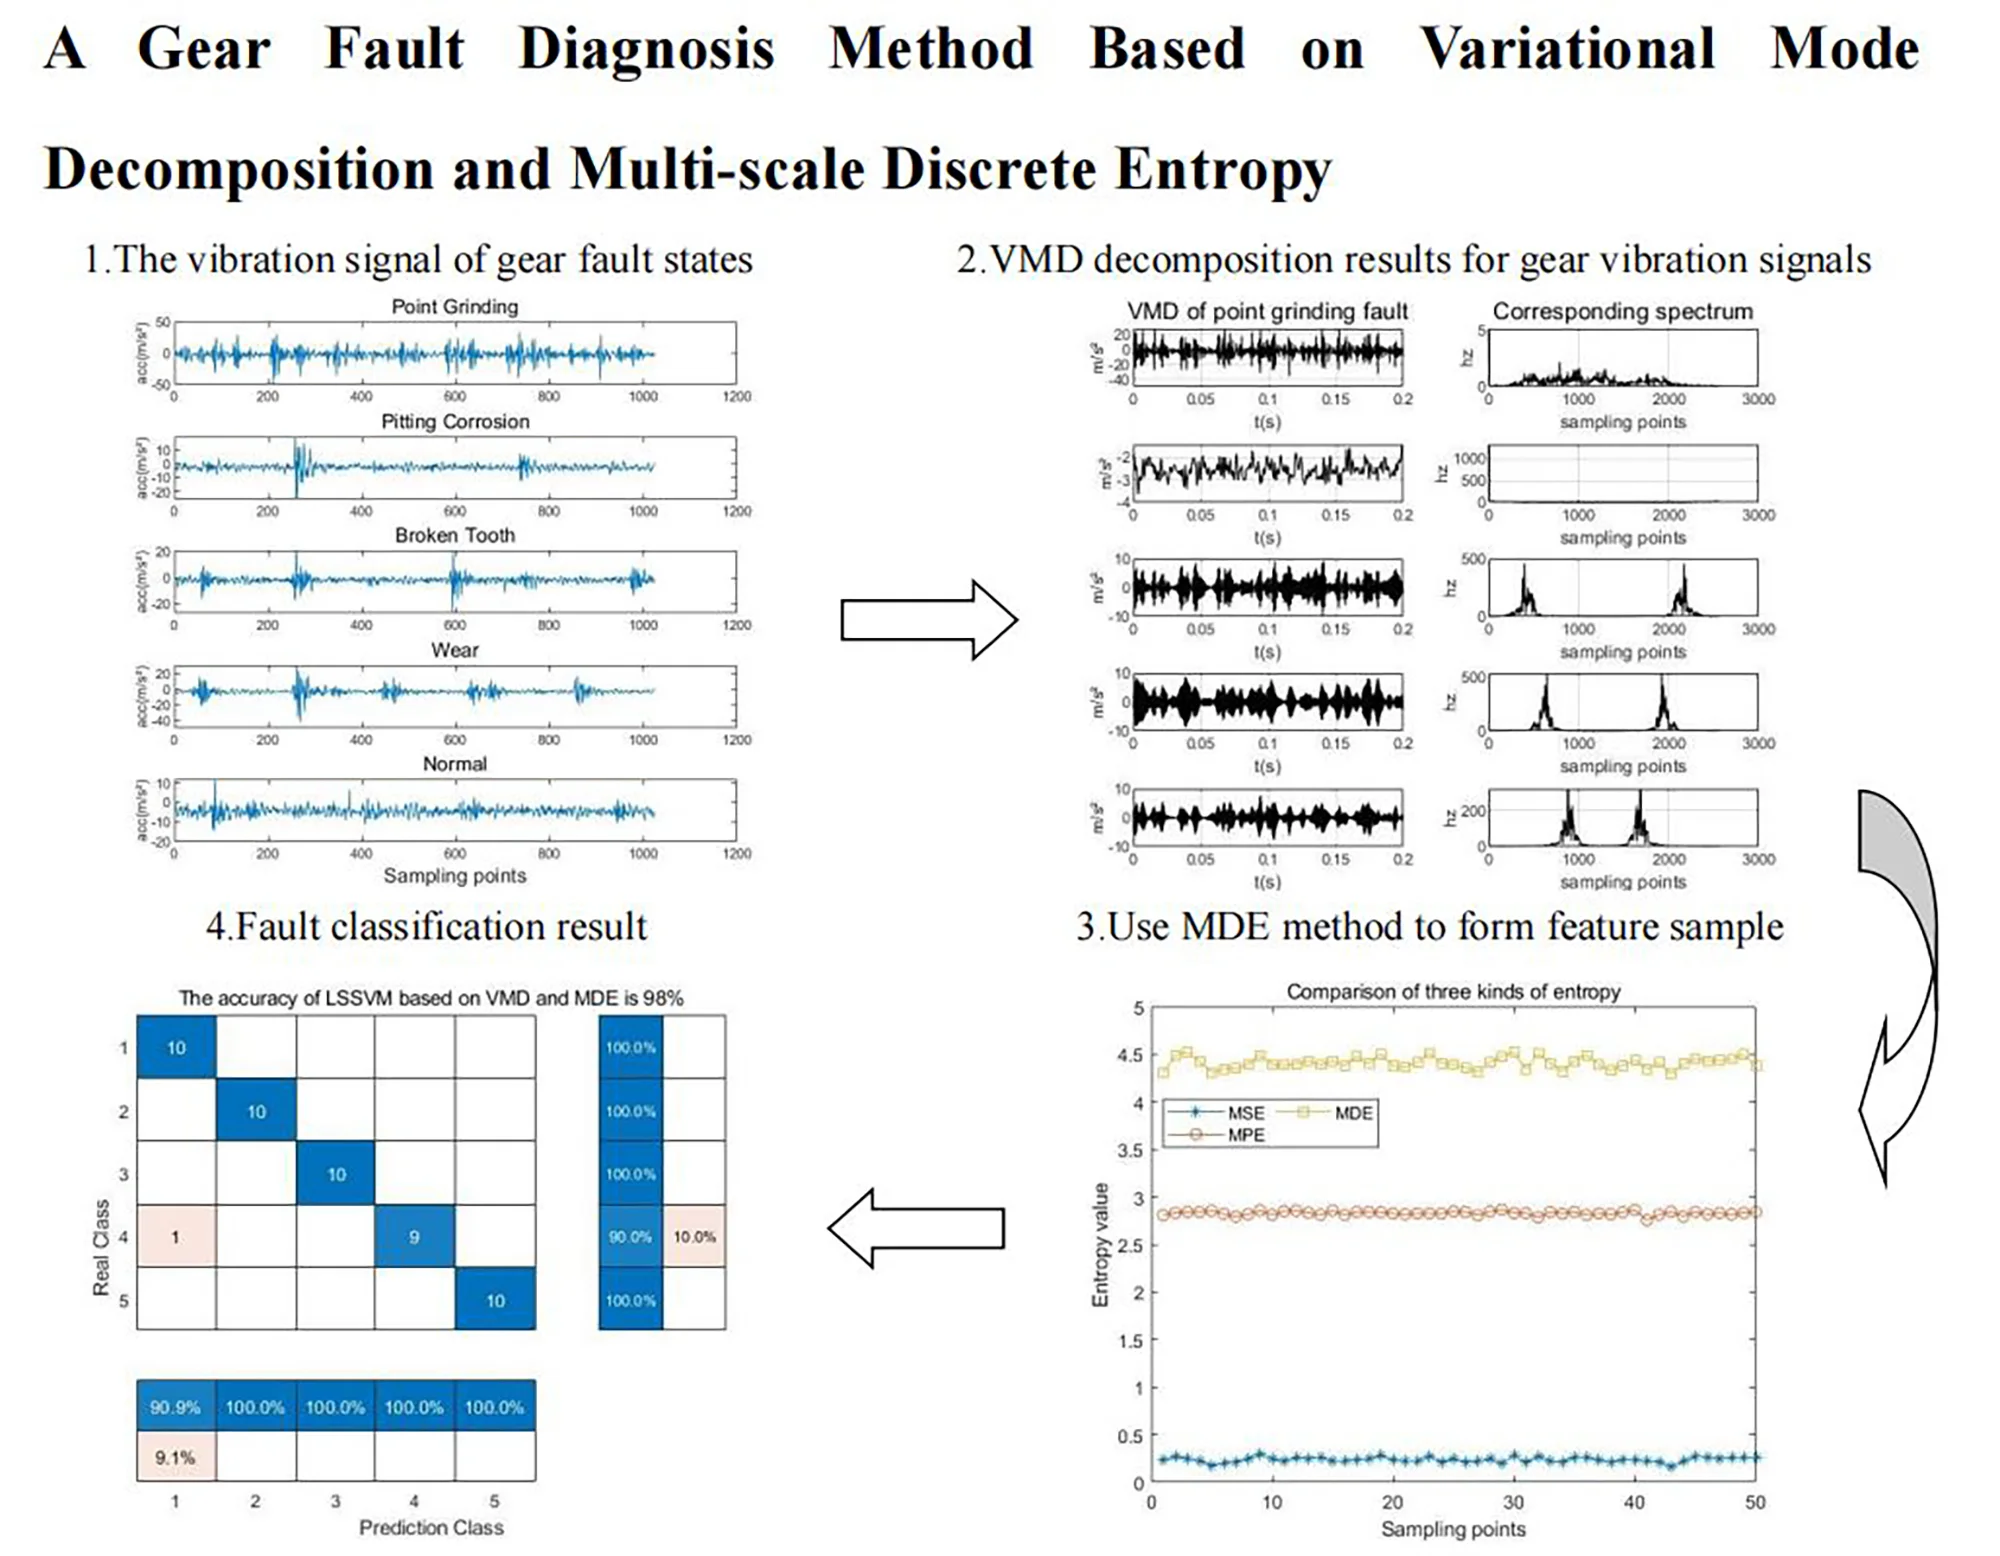 A gear fault diagnosis method based on variational mode decomposition and multi-scale discrete entropy